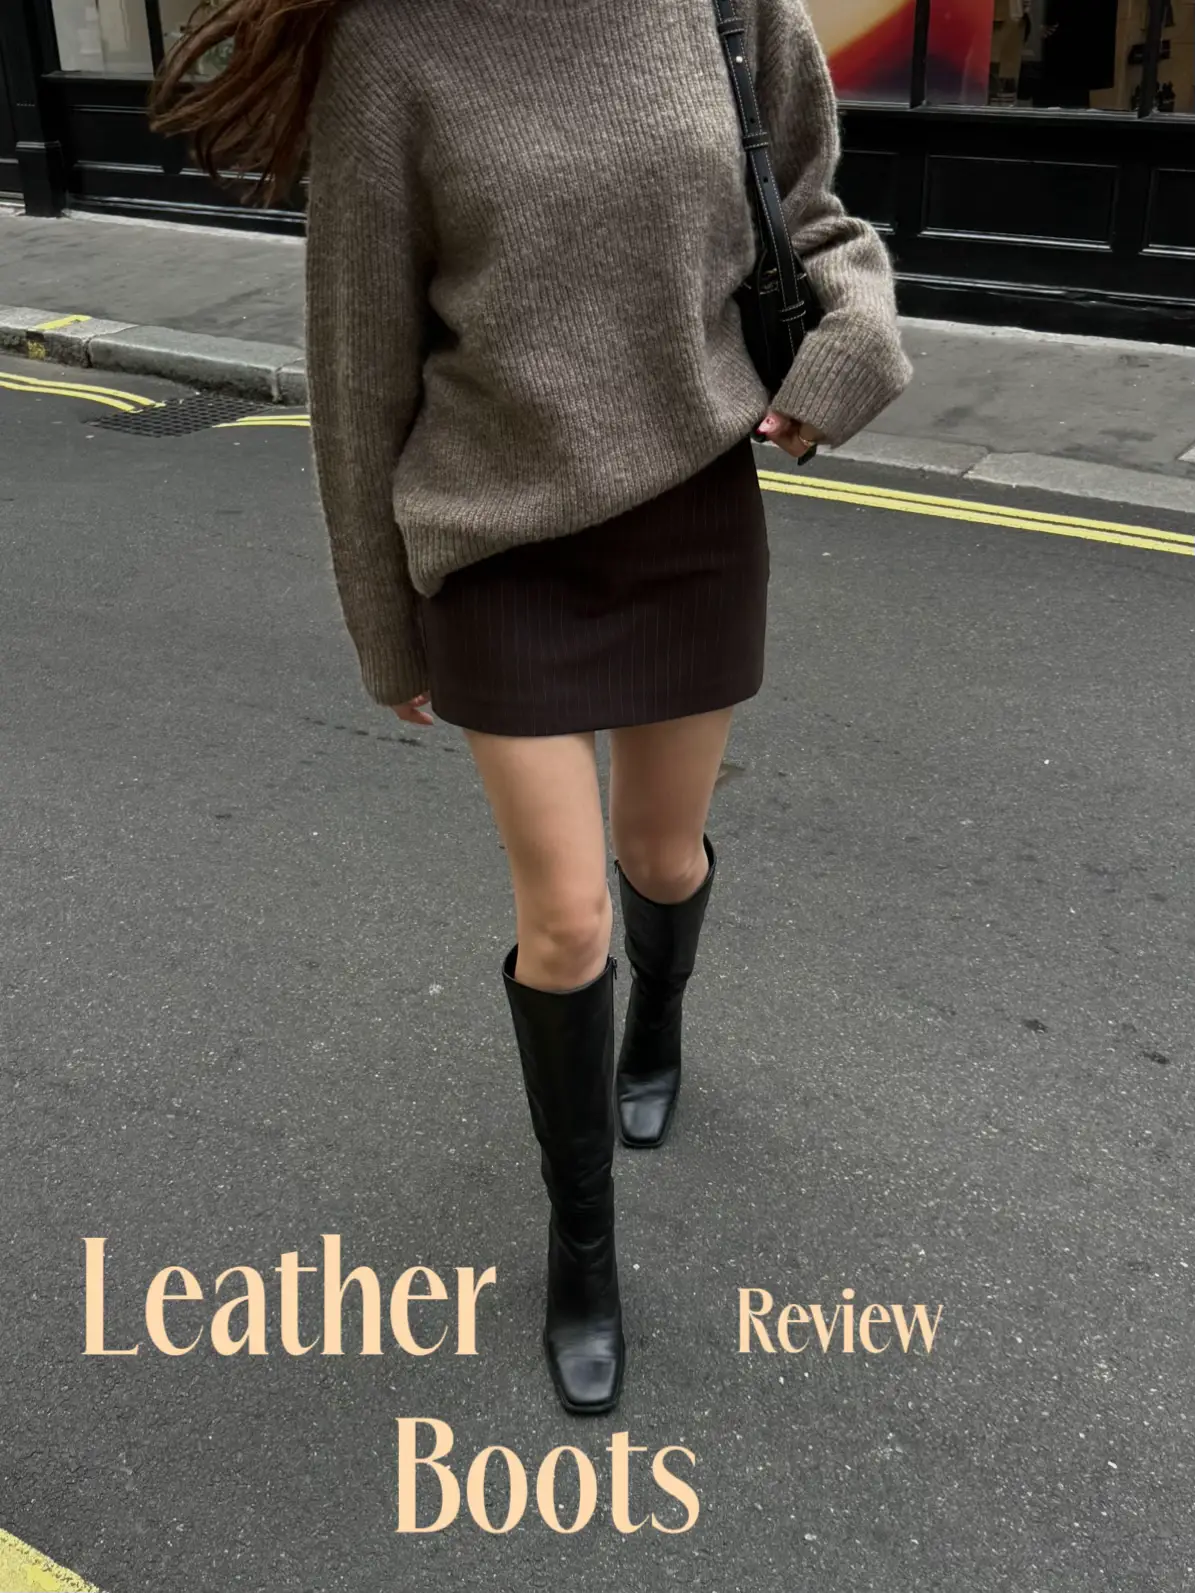 Leather skirt + fall sale reviews (petite sweaters + boots)